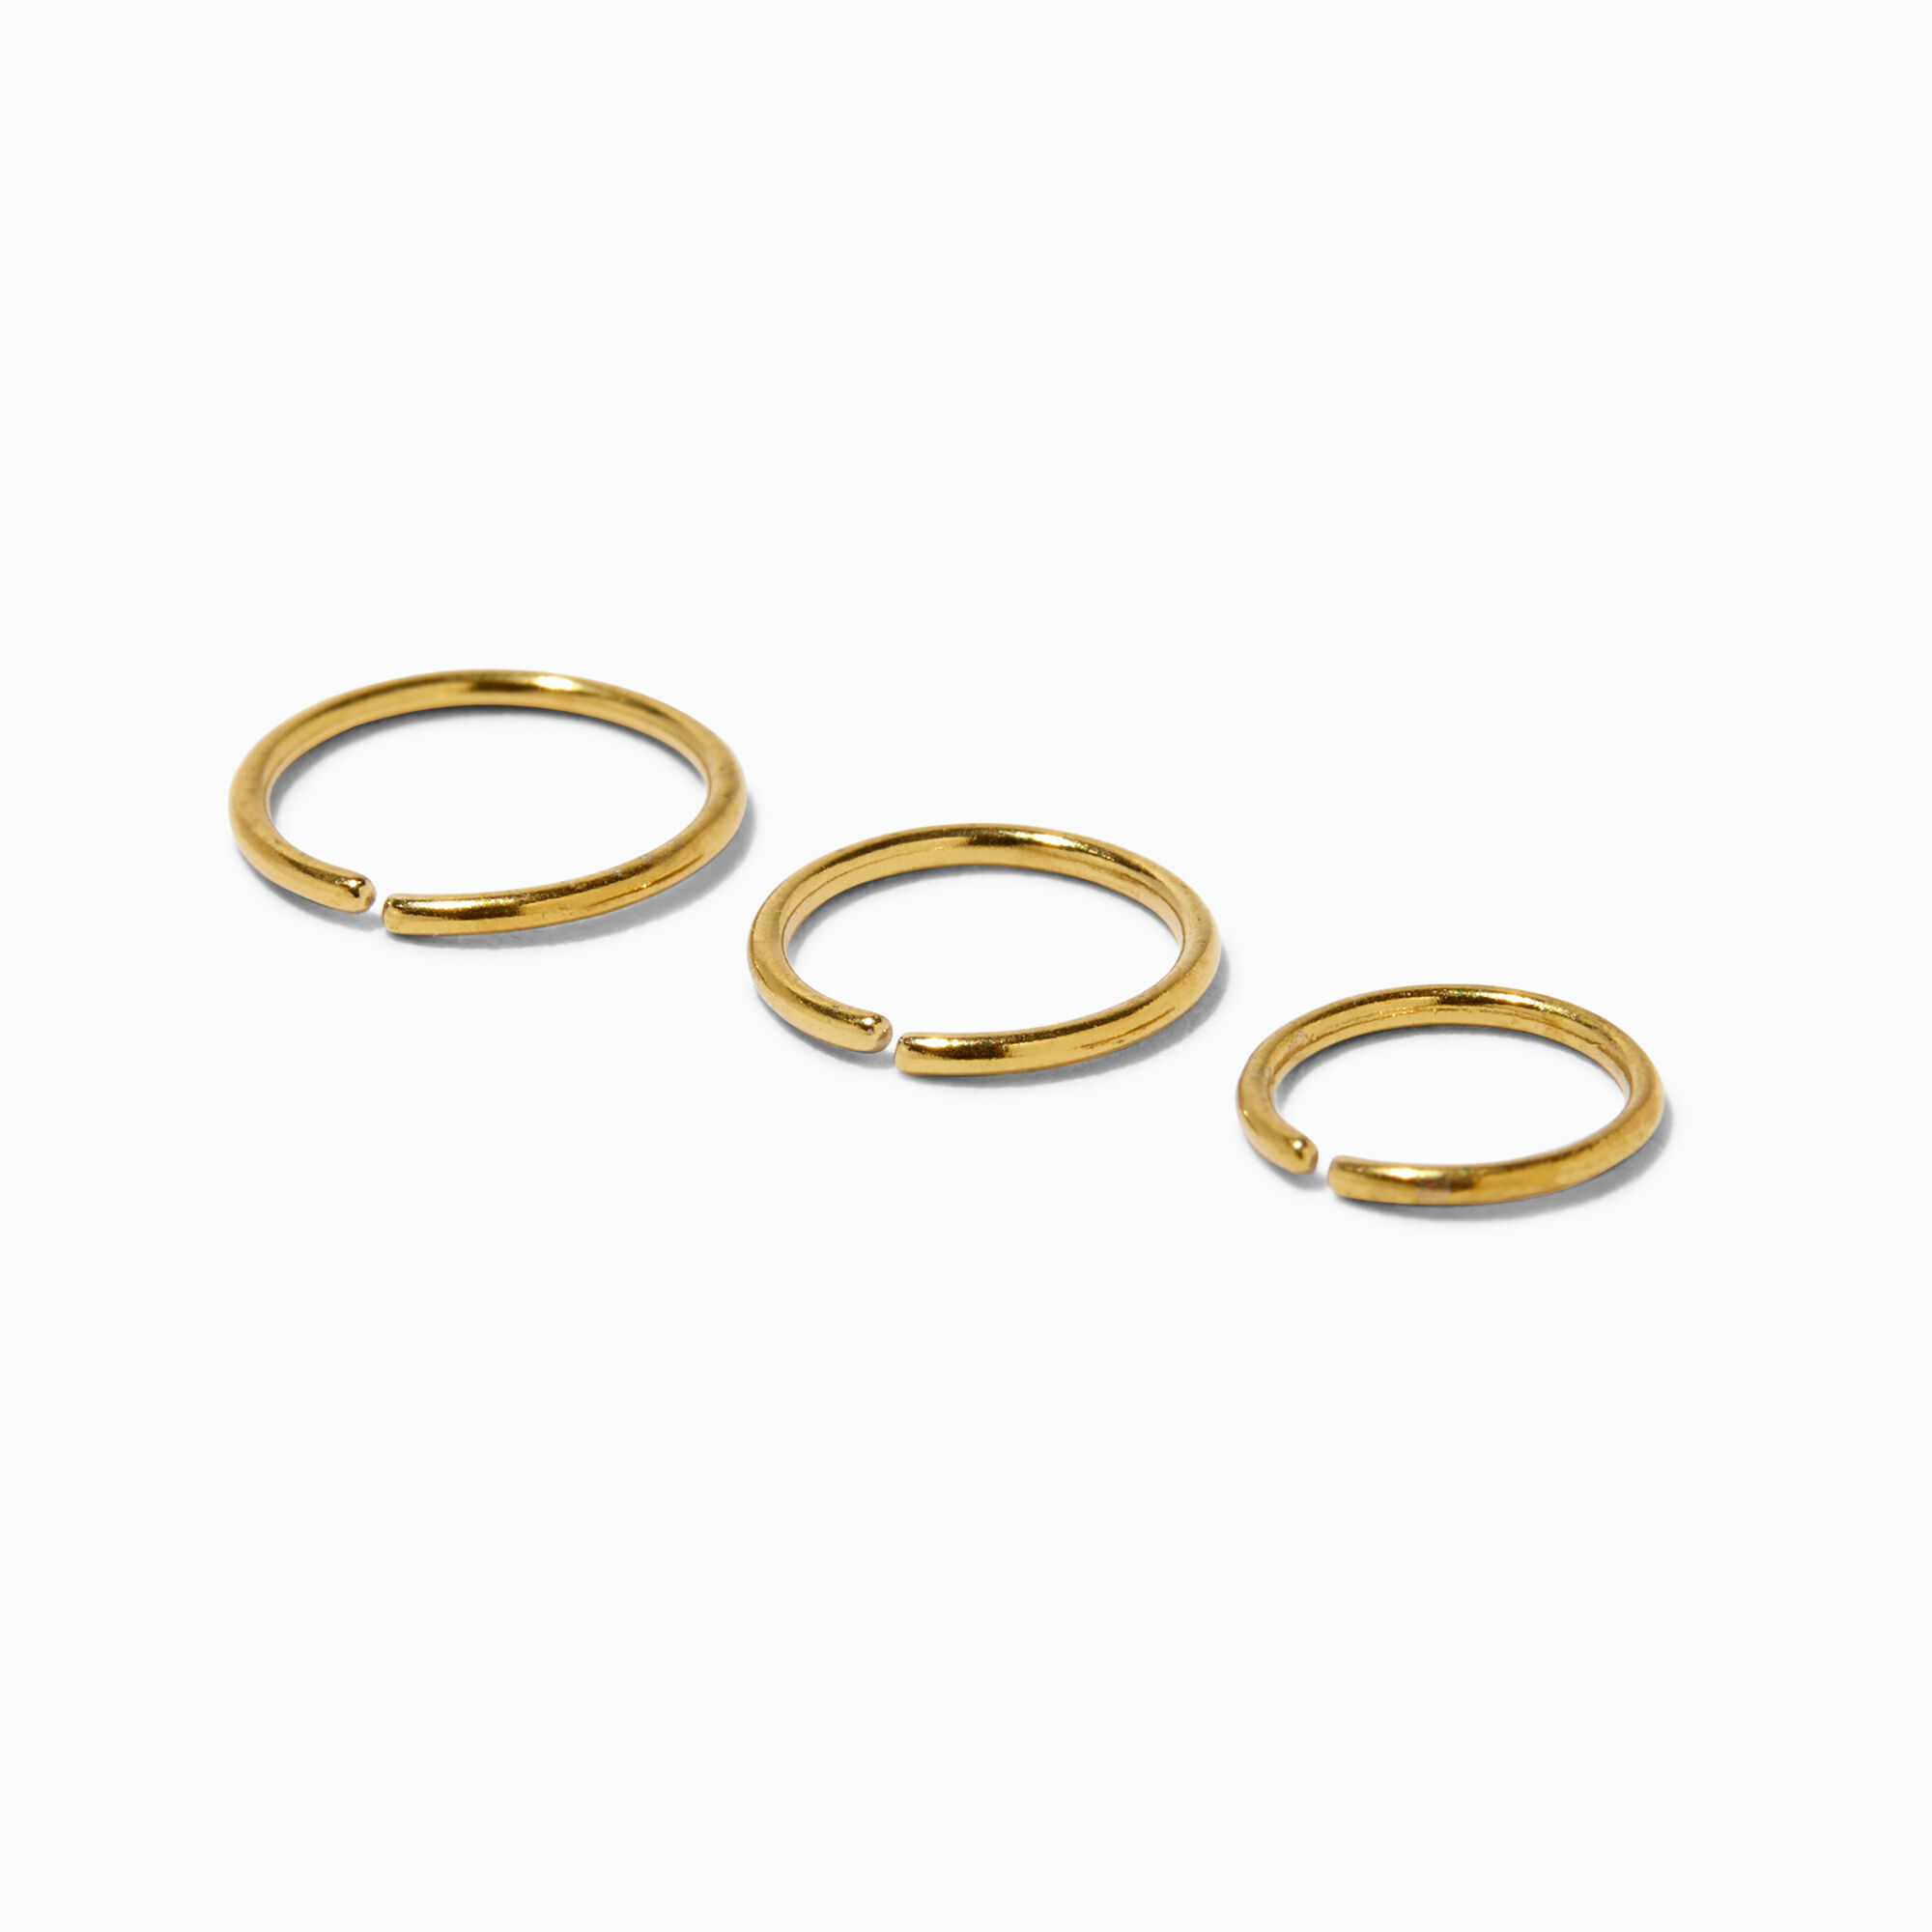 View Claires Tone 20G Mixed Nose Hoops 3 Pack Gold information